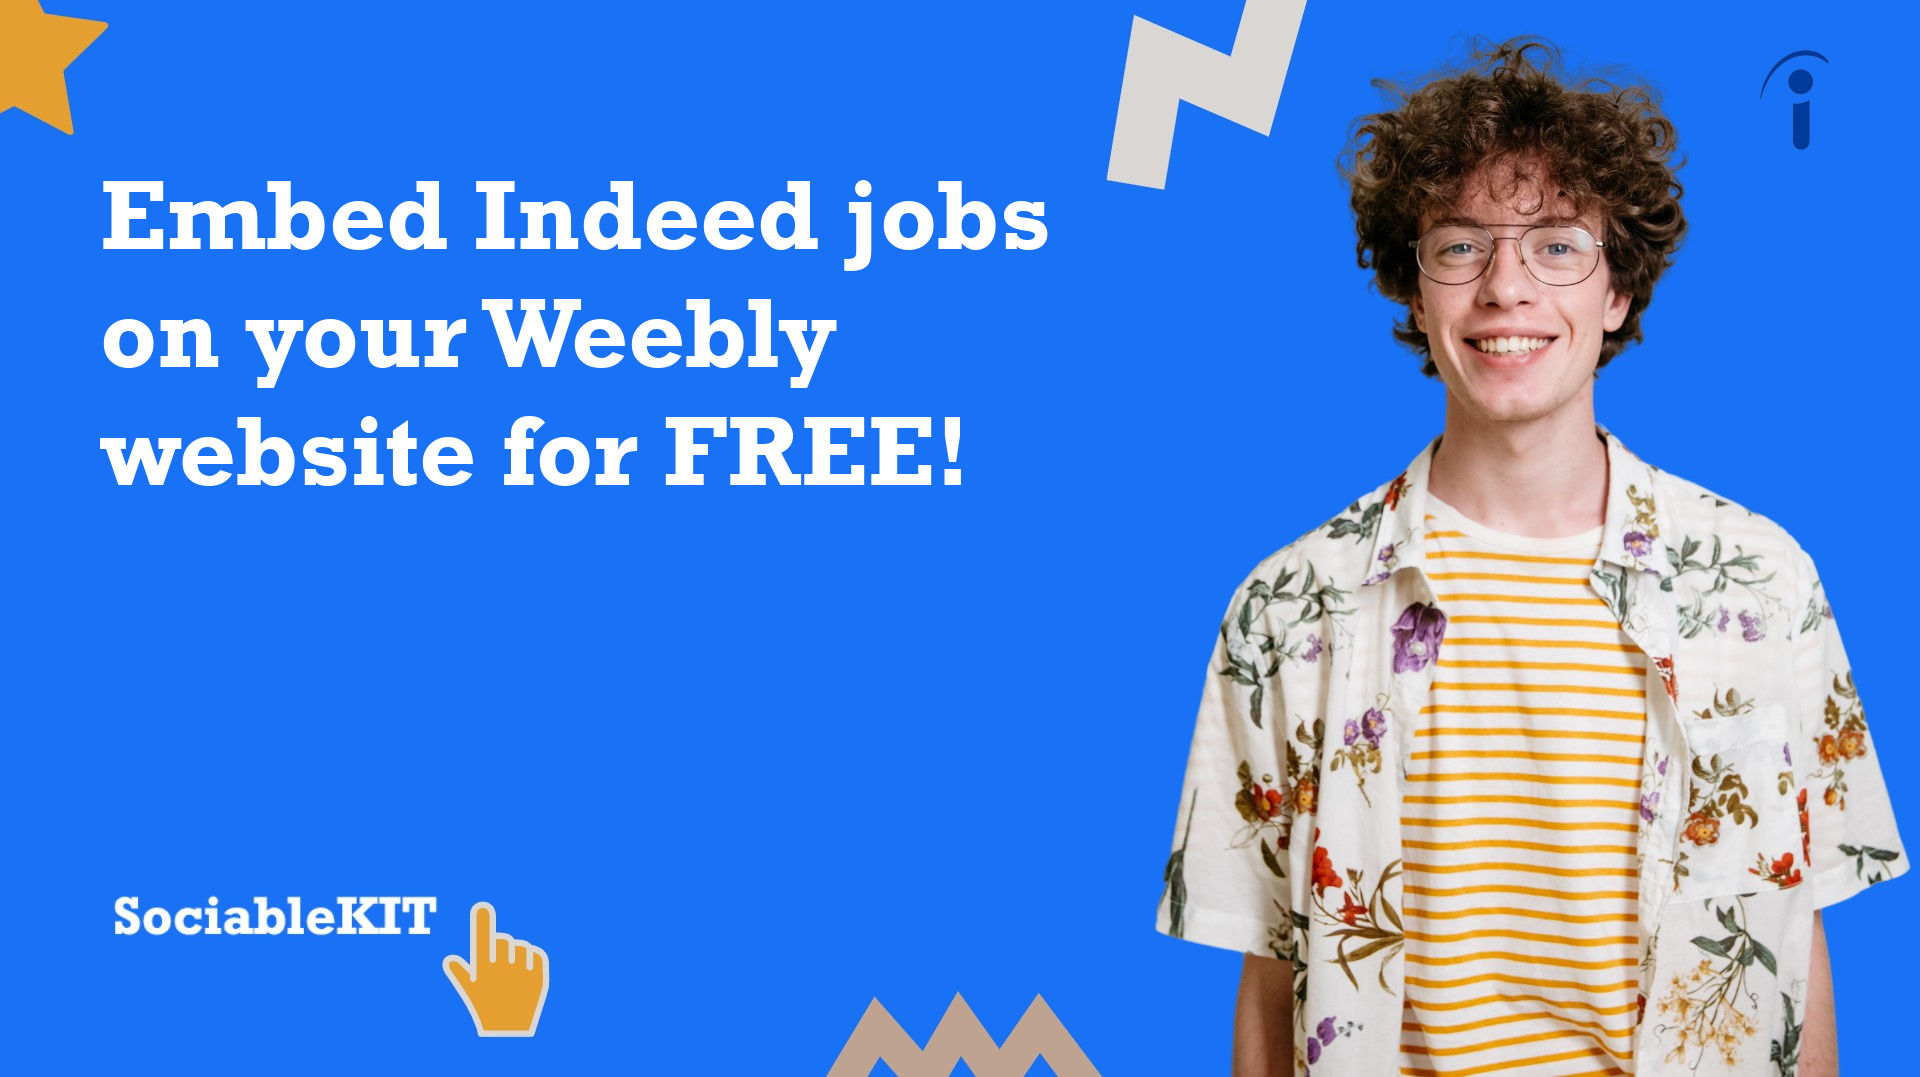 How to embed Indeed jobs on your Weebly website for FREE?